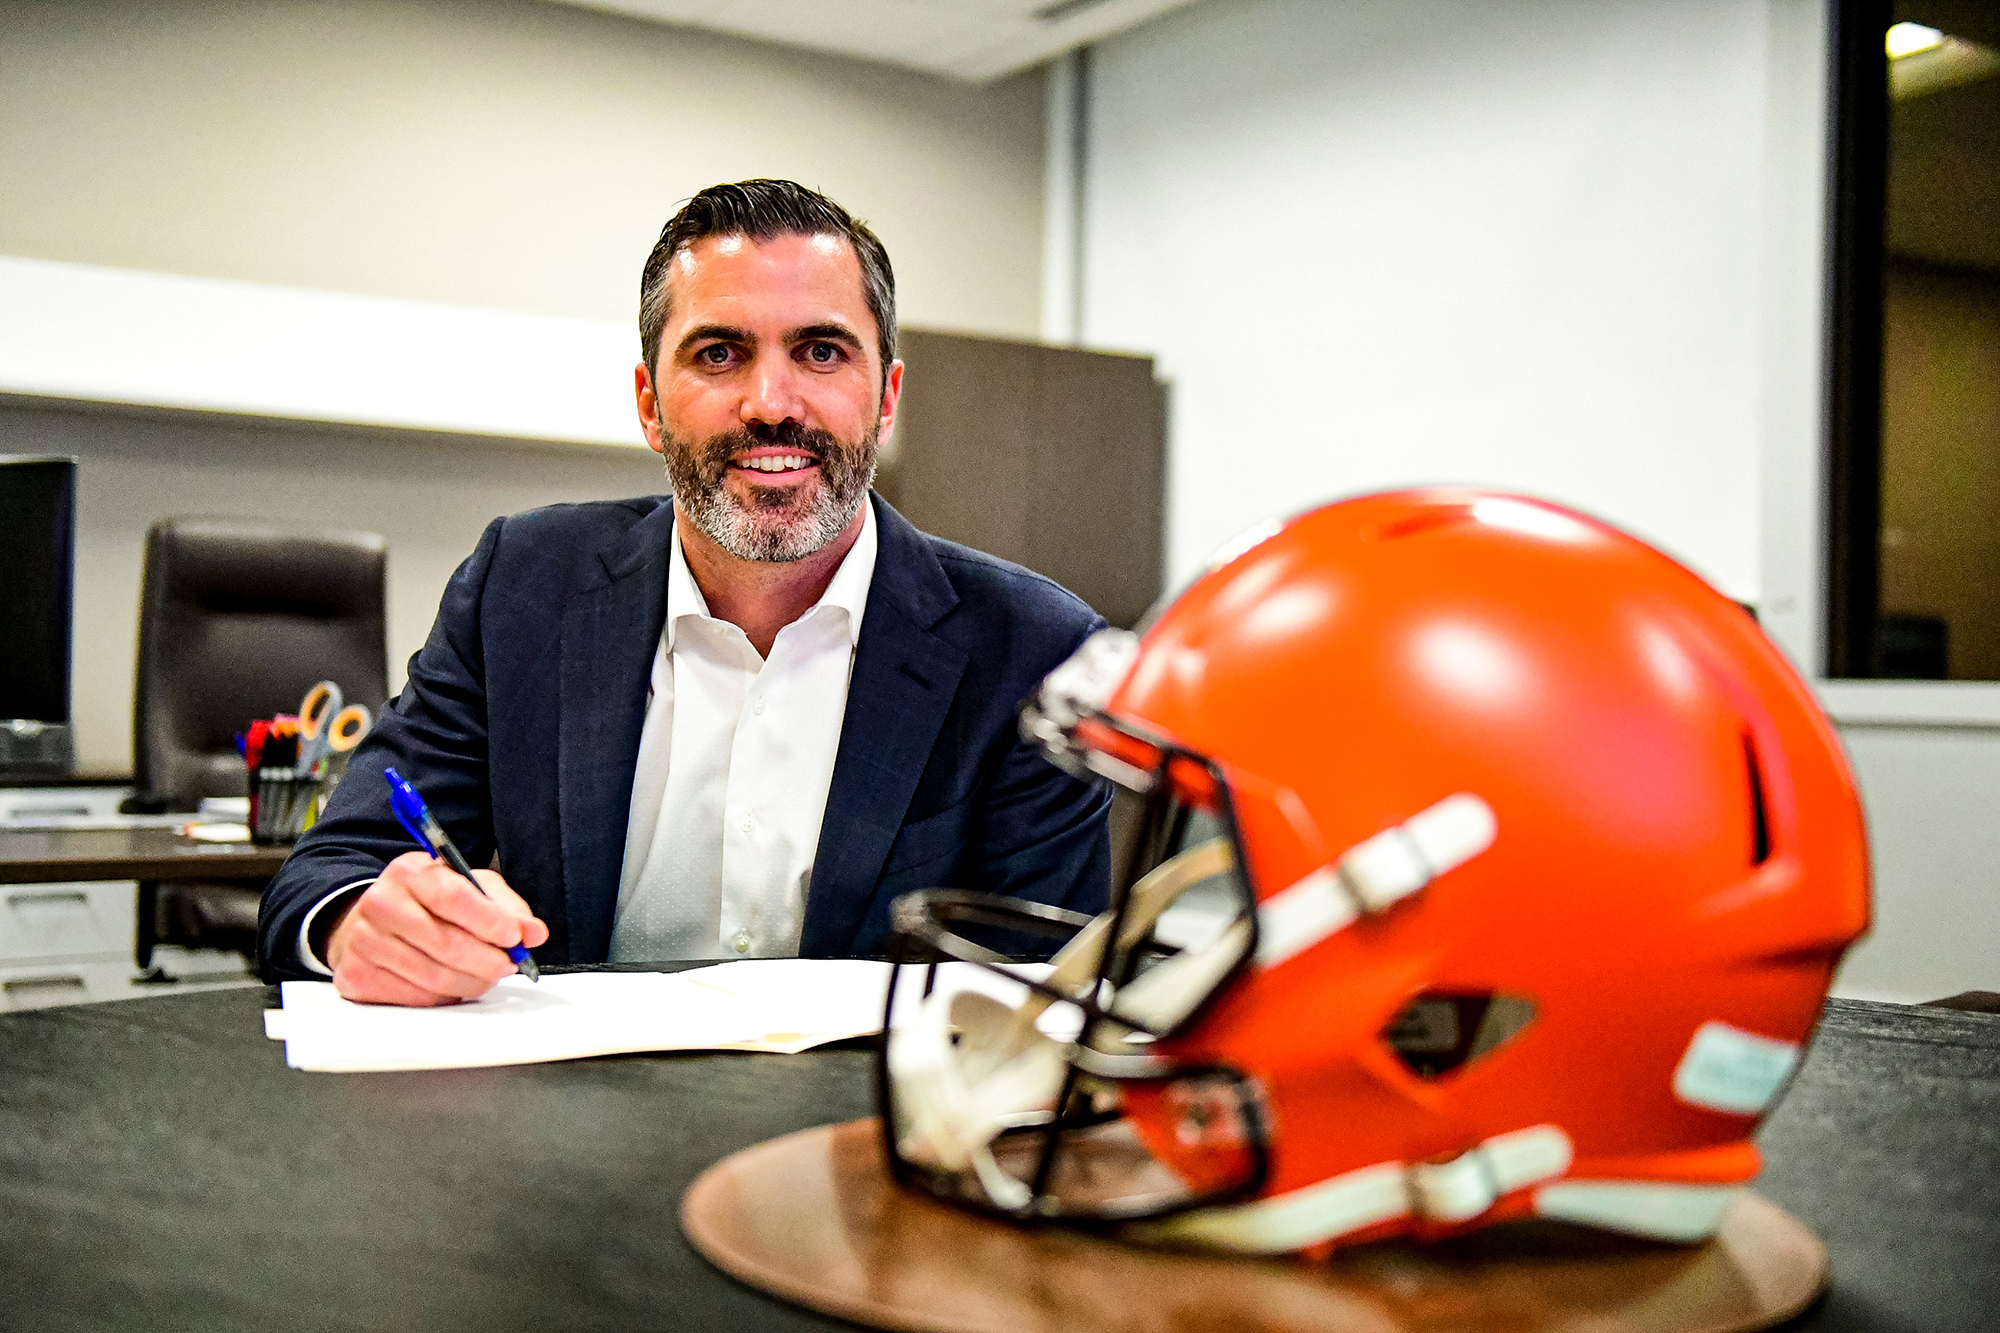 At a table containing a Cleveland Browns helmet, new Browns Coach Kevin Stefanski signs a document.